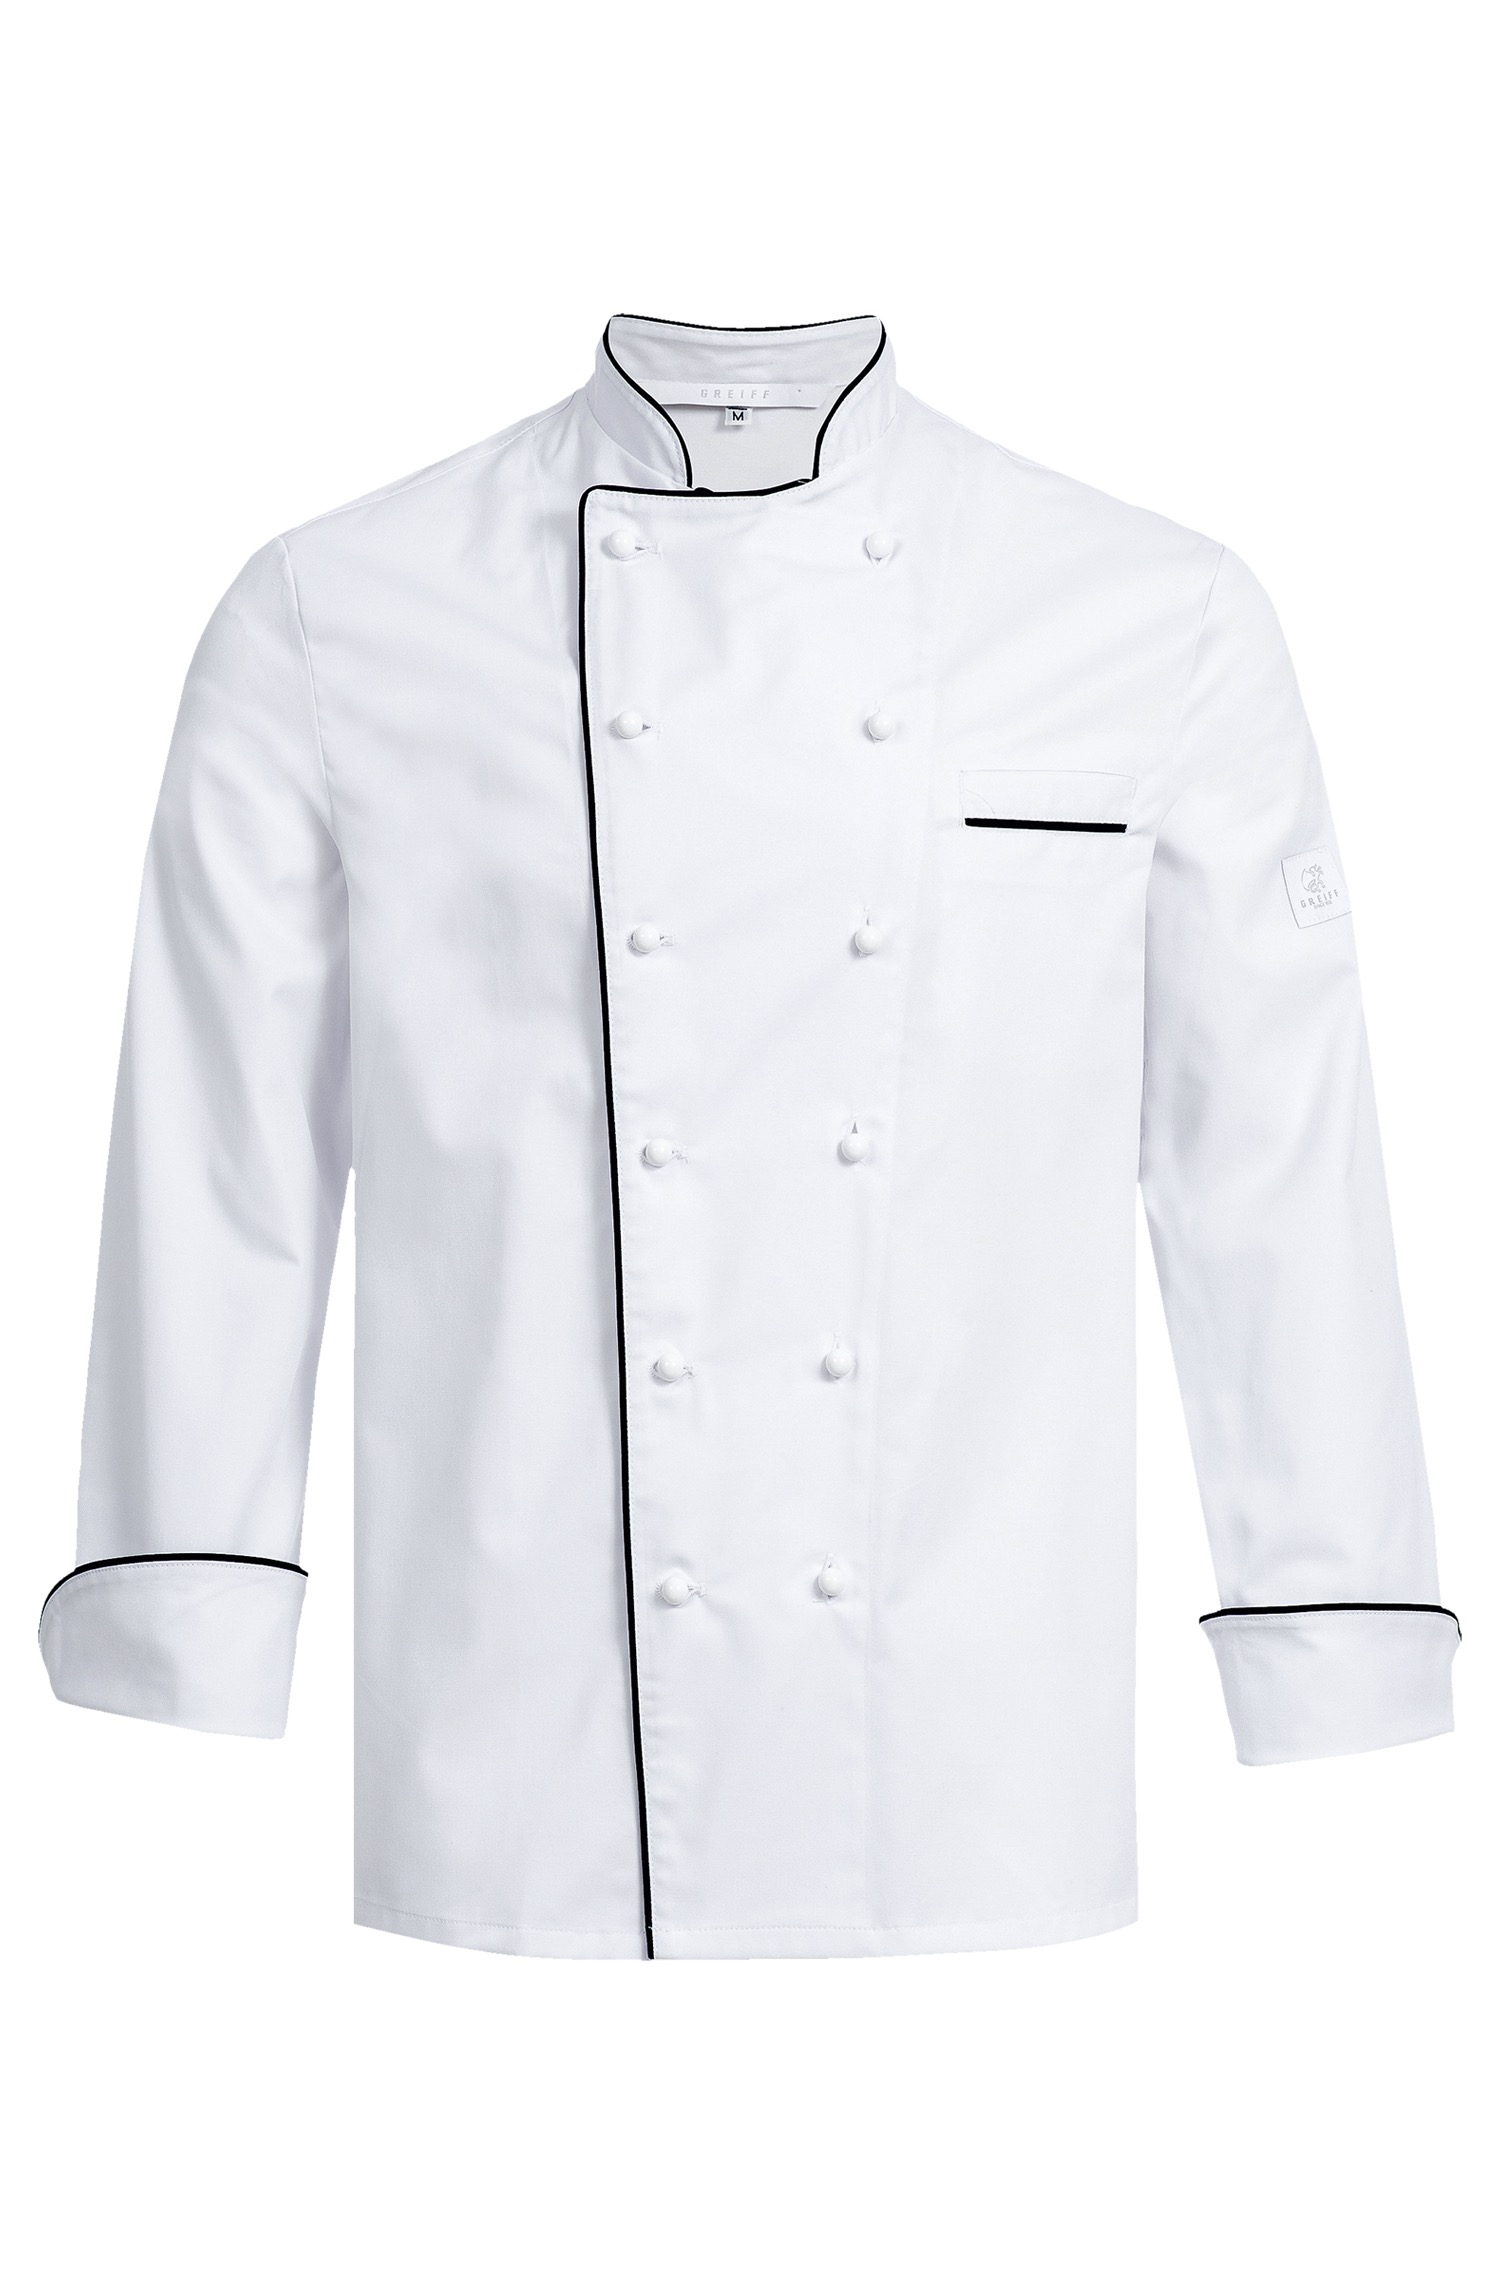 Chef's jacket with Greiff® piping